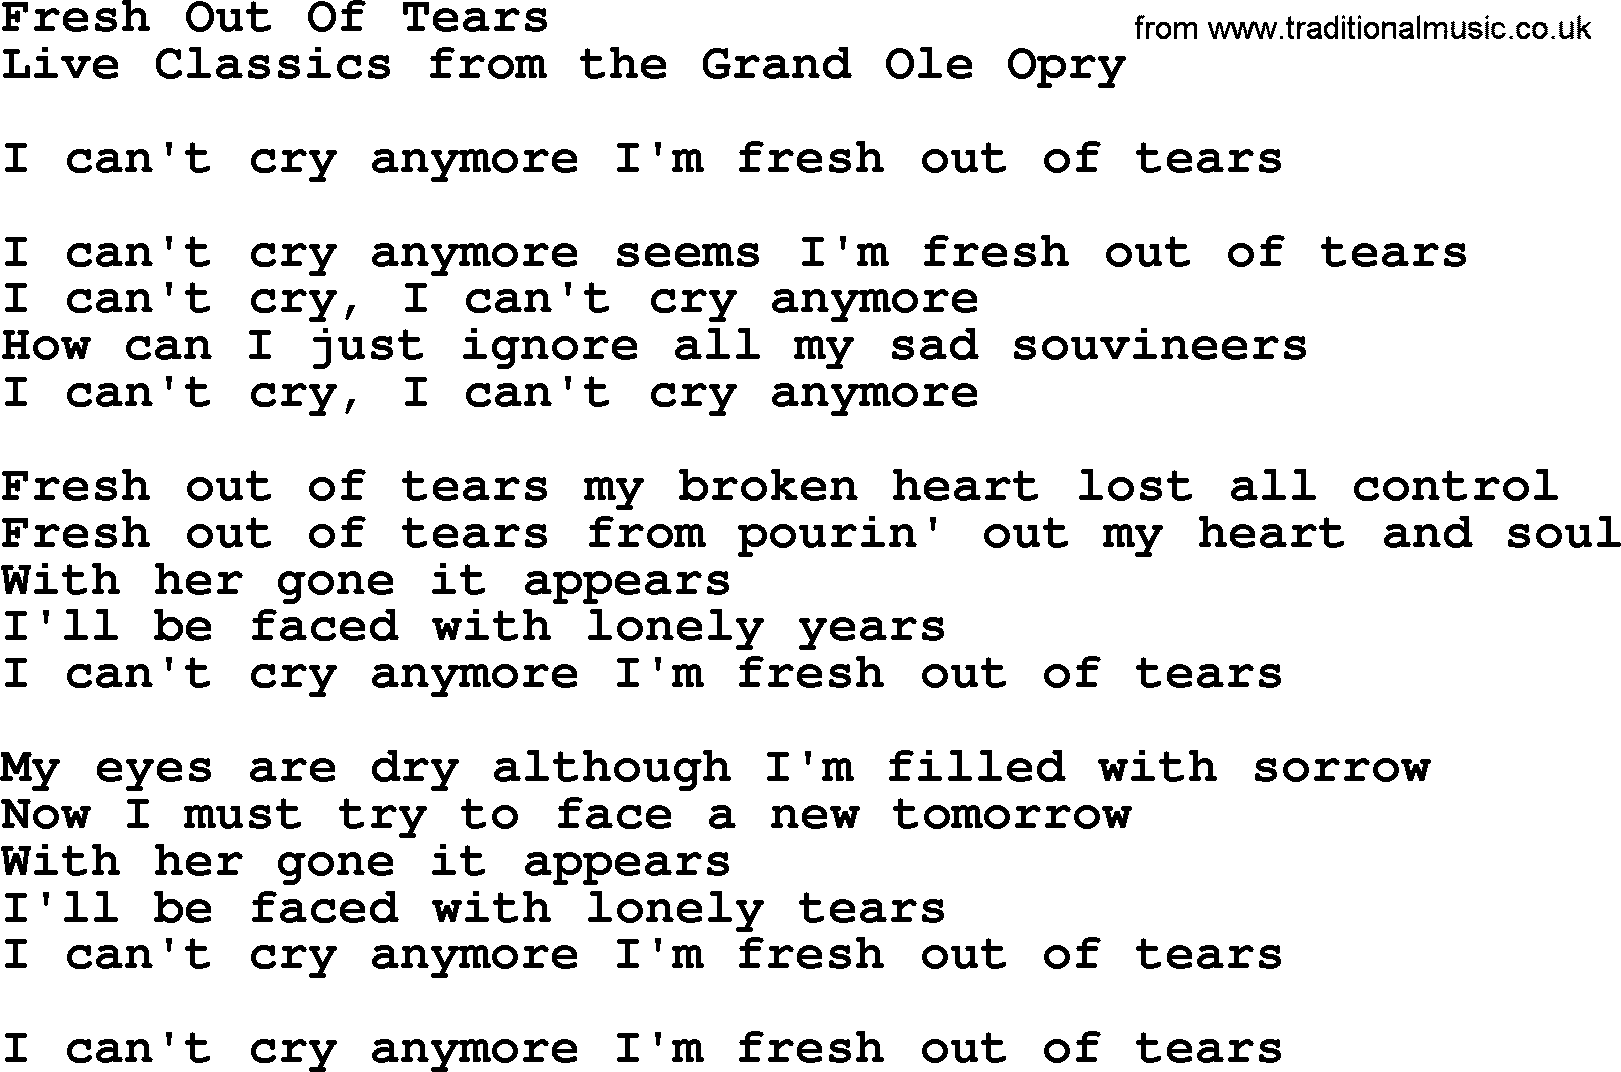 Marty Robbins song: Fresh Out Of Tears, lyrics